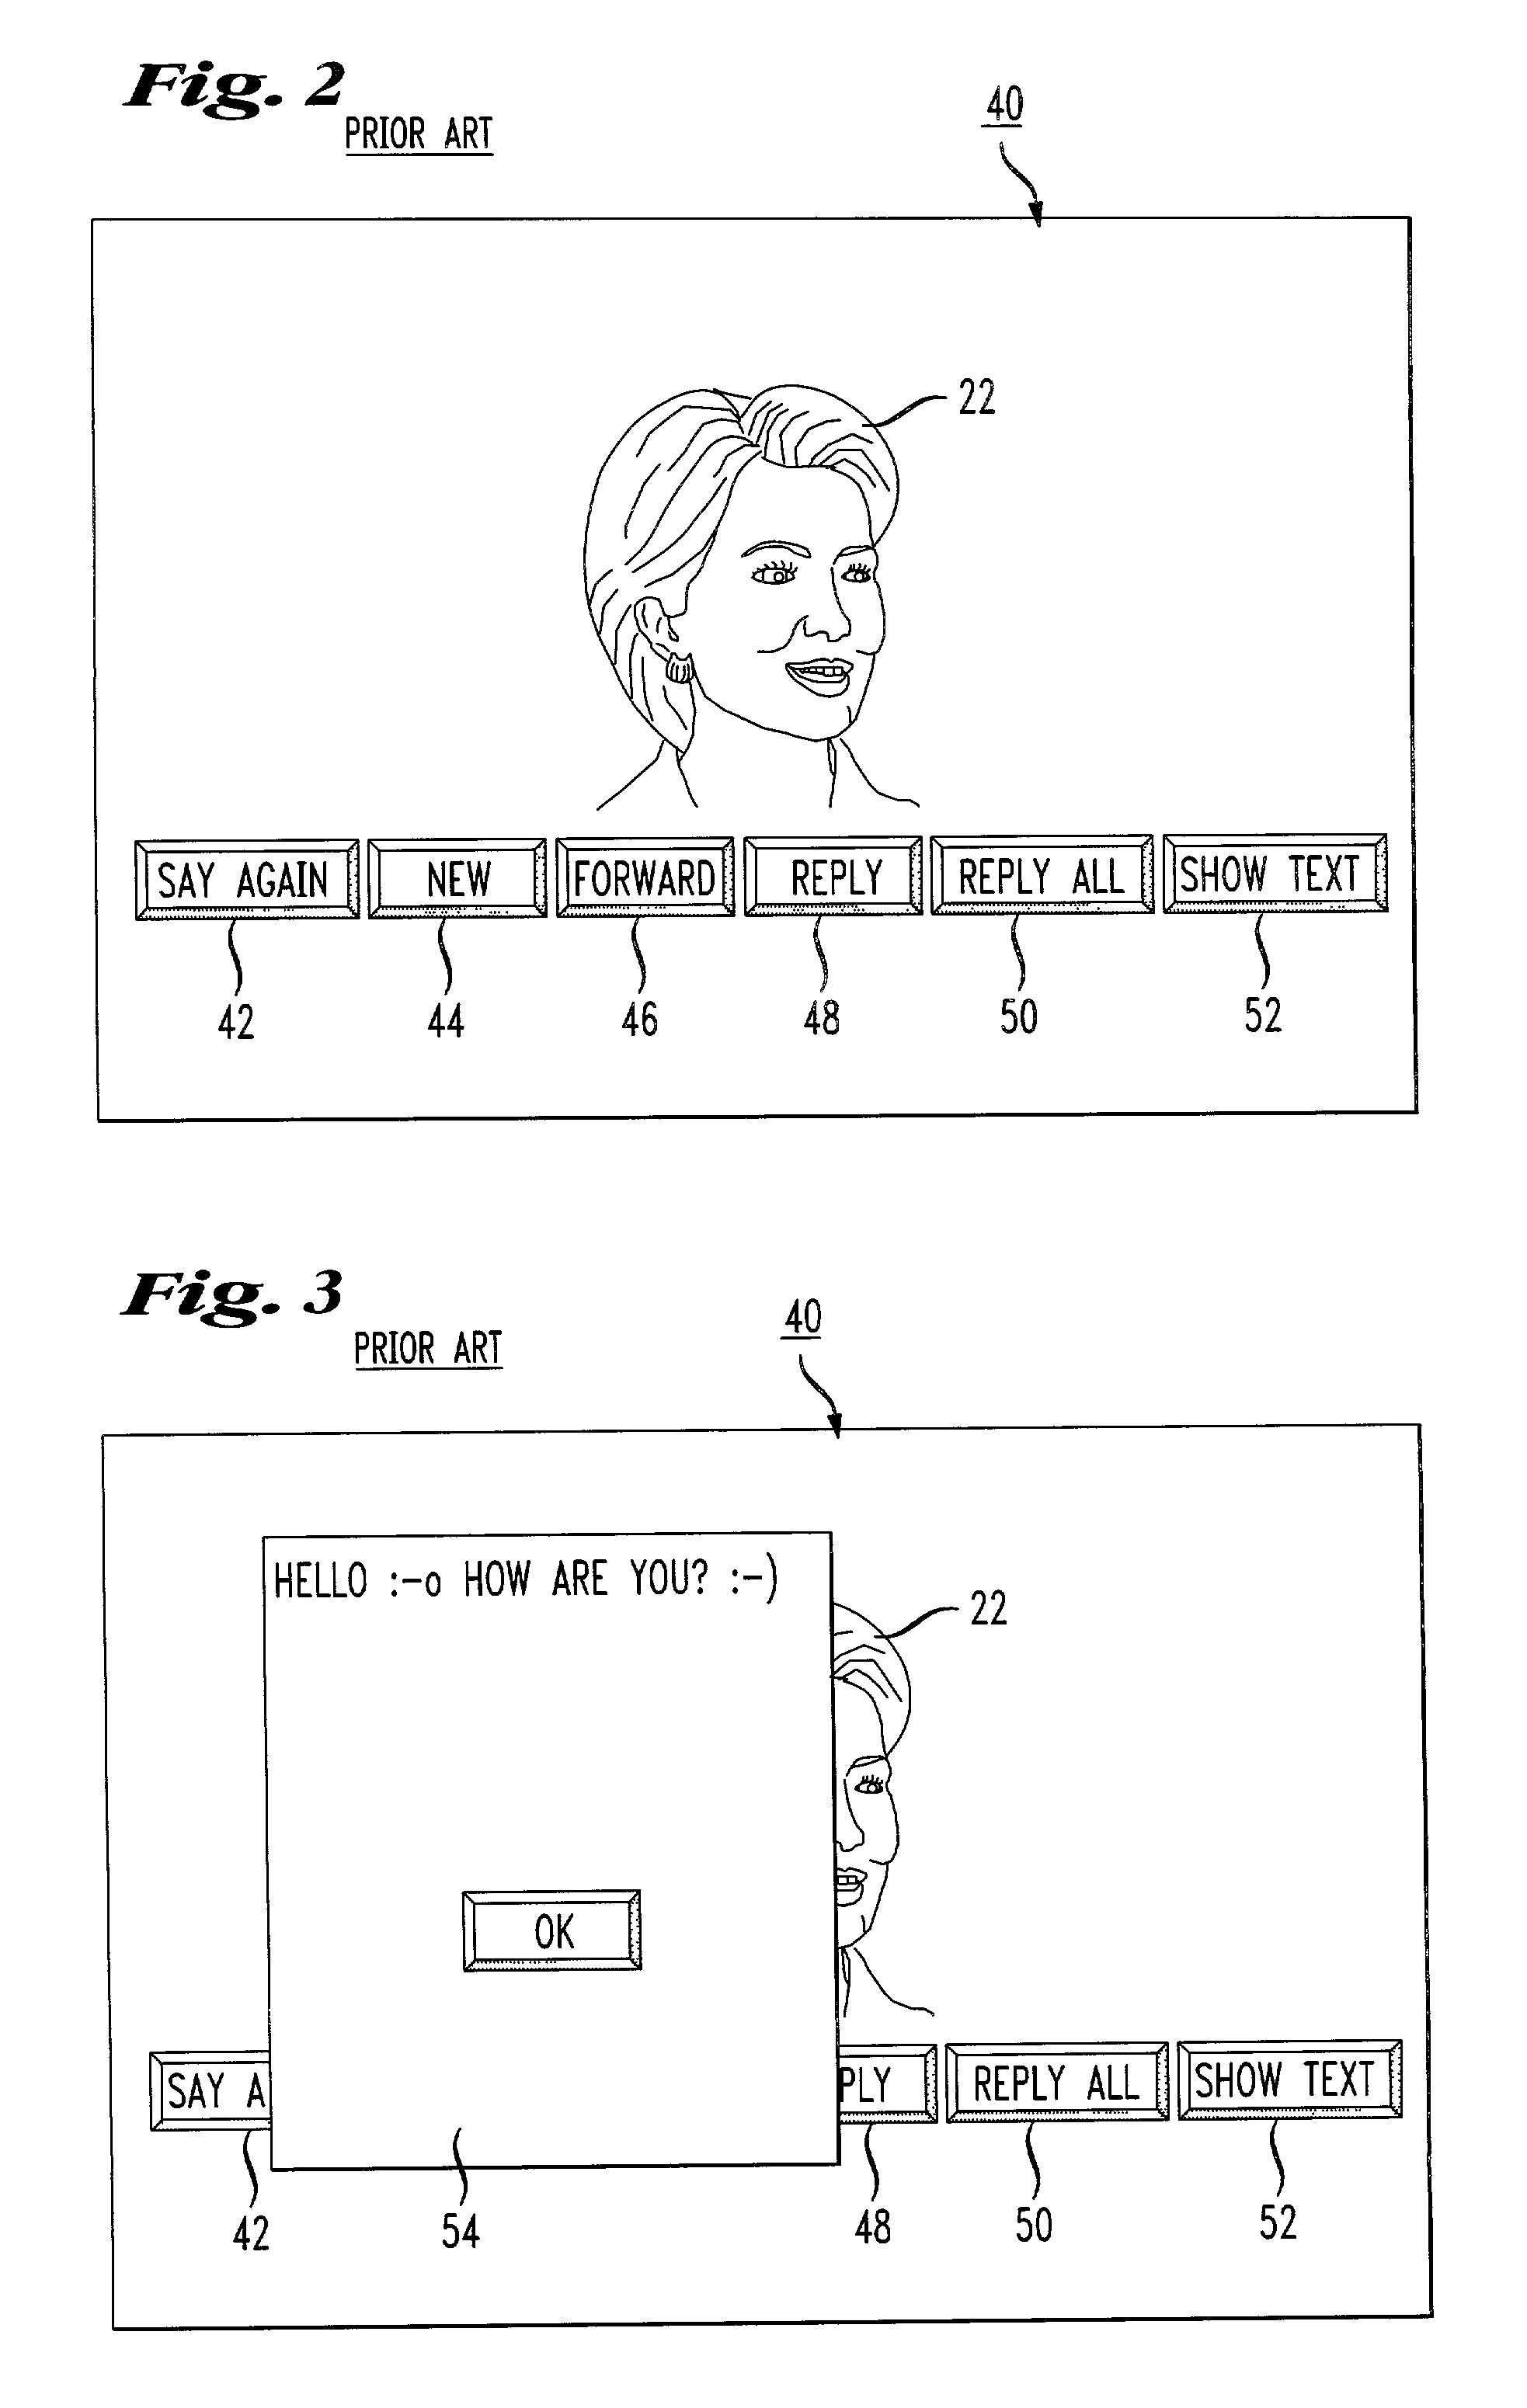 System and method of customizing animated entities for use in a multi-media communication application